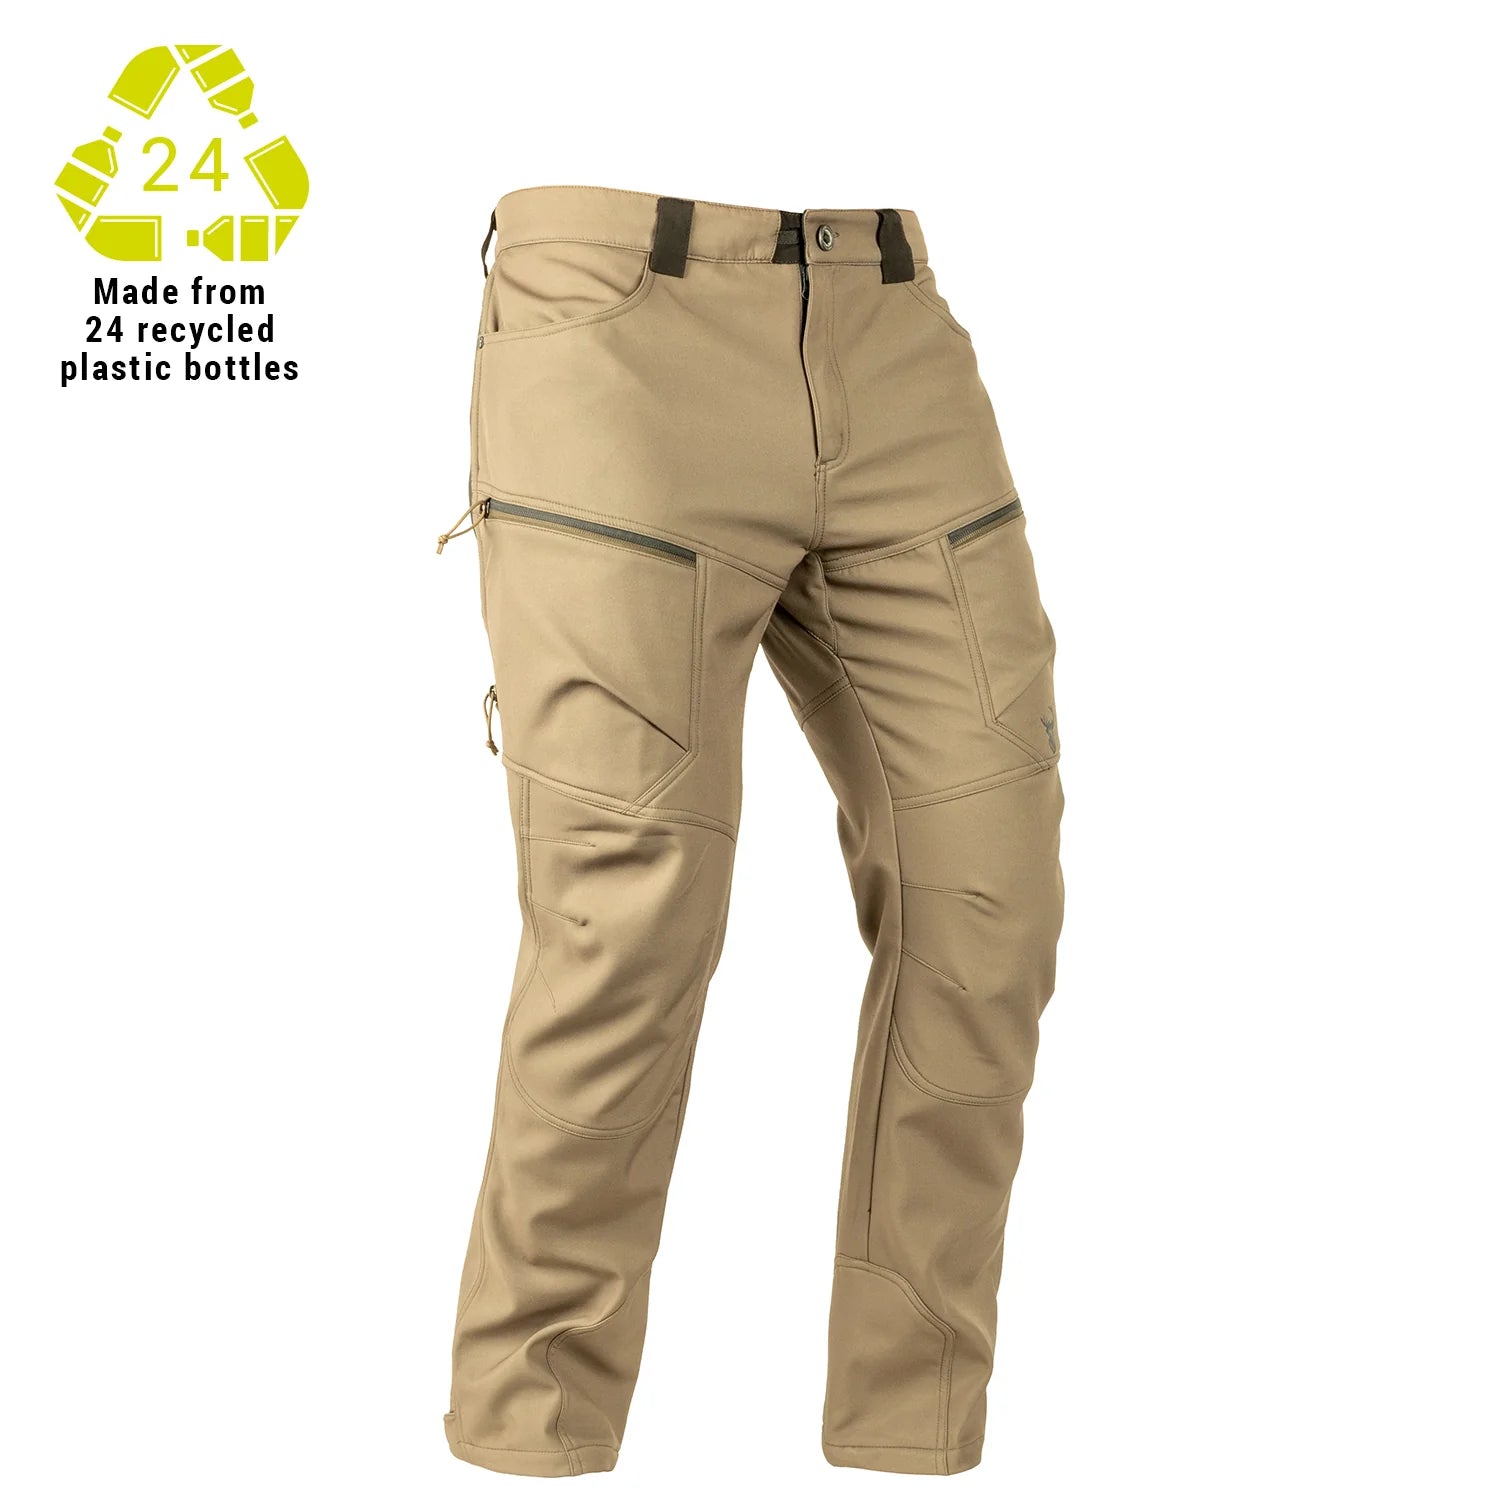 Hunters Element Legacy Trouser - Tussock - XS / TUSSOCK - Mansfield Hunting & Fishing - Products to prepare for Corona Virus